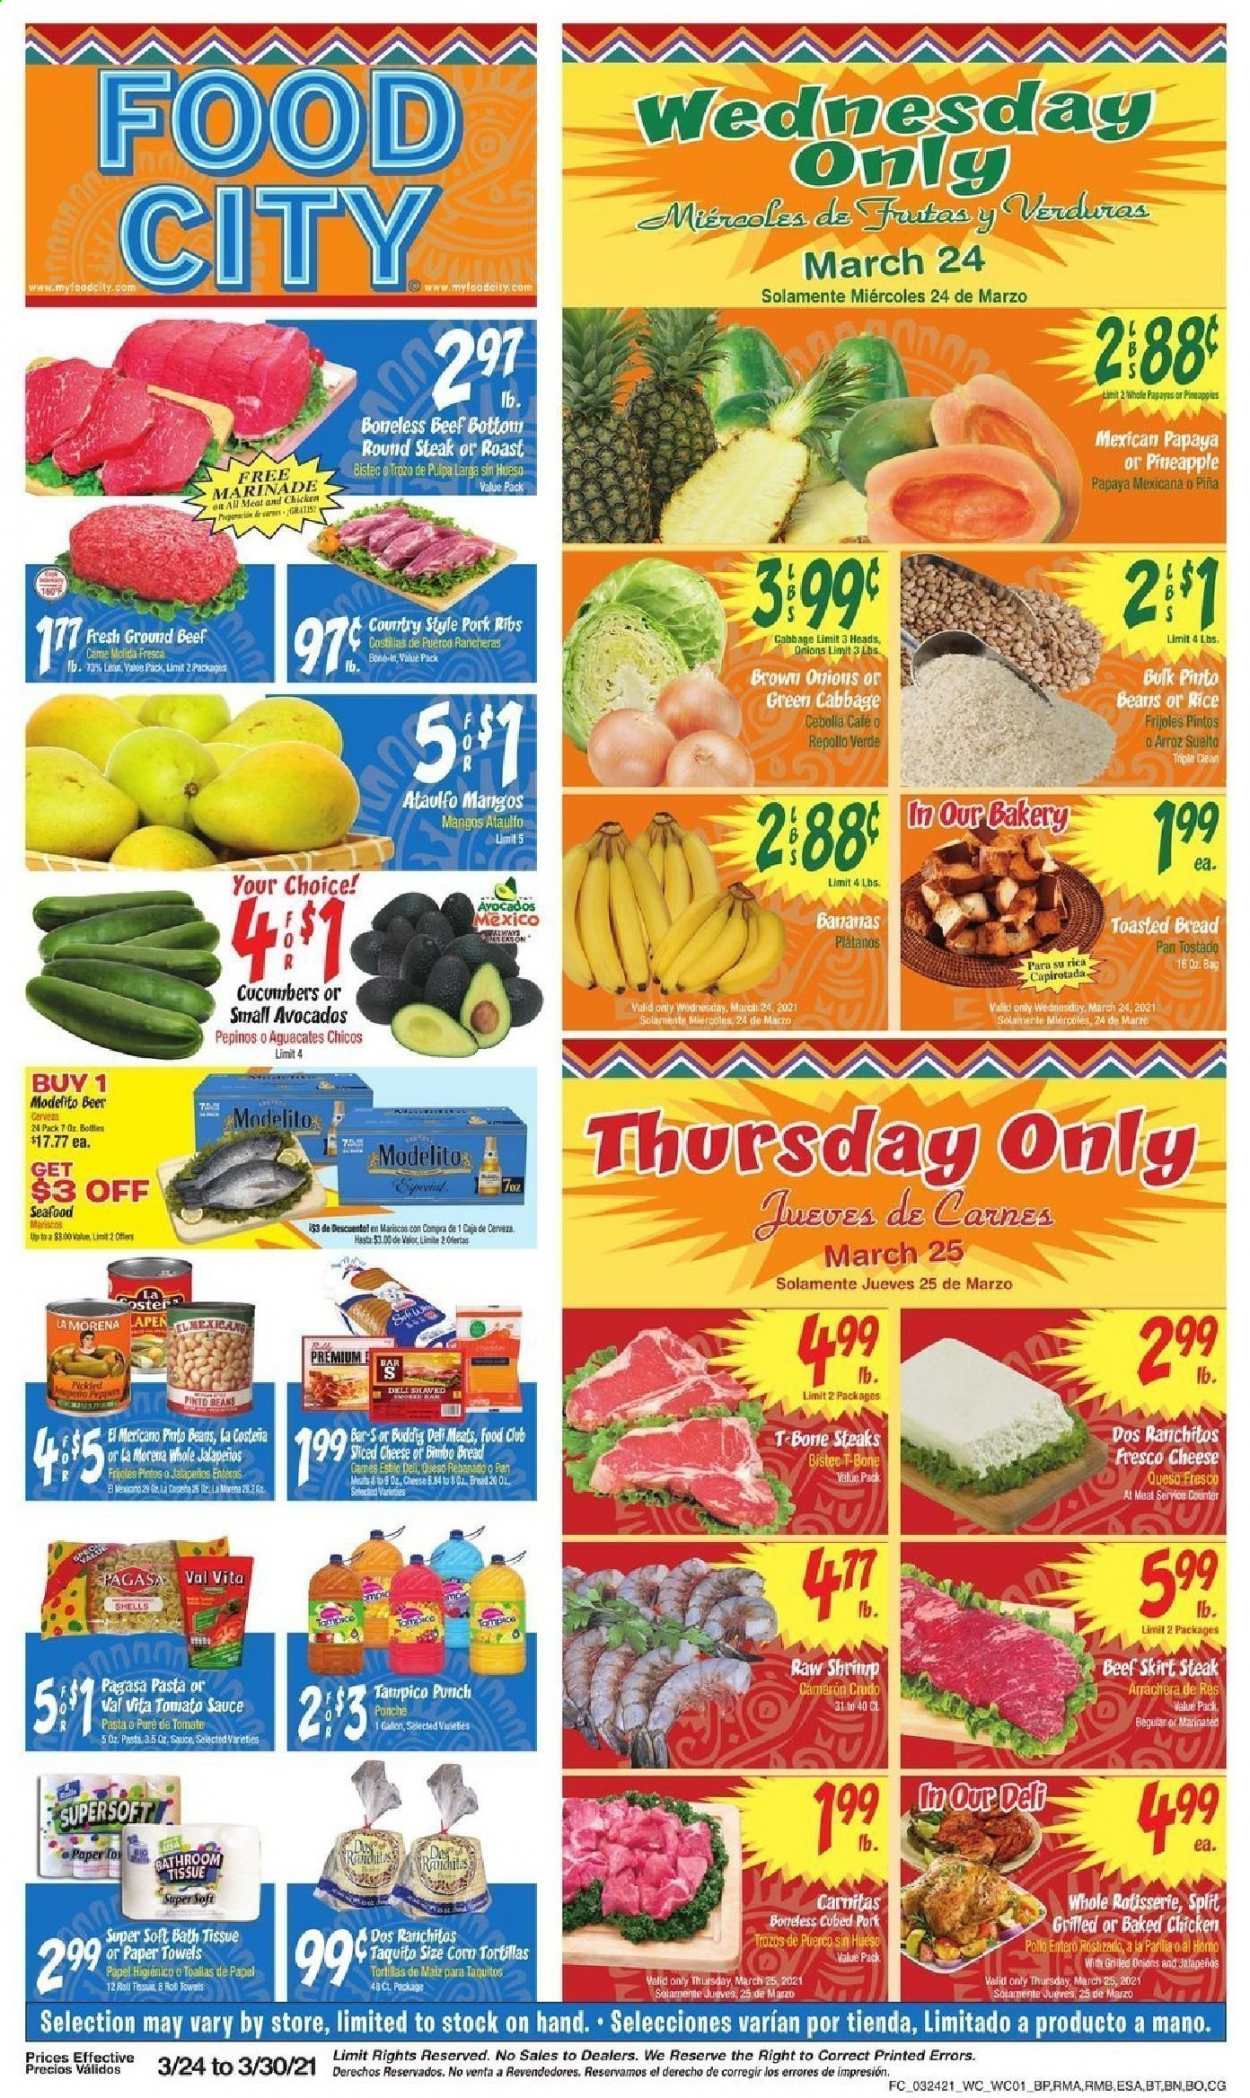 thumbnail - Food City Flyer - 03/24/2021 - 03/30/2021 - Sales products - papaya, bread, tortillas, tostadas, seafood, sauce, taquitos, sliced cheese, queso fresco, beans, mango, cucumber, rice, pinto beans, pasta, marinade, tomato sauce, punch, beer, beef meat, ground beef, t-bone steak, steak, round steak, pork meat, pork ribs, avocado. Page 1.